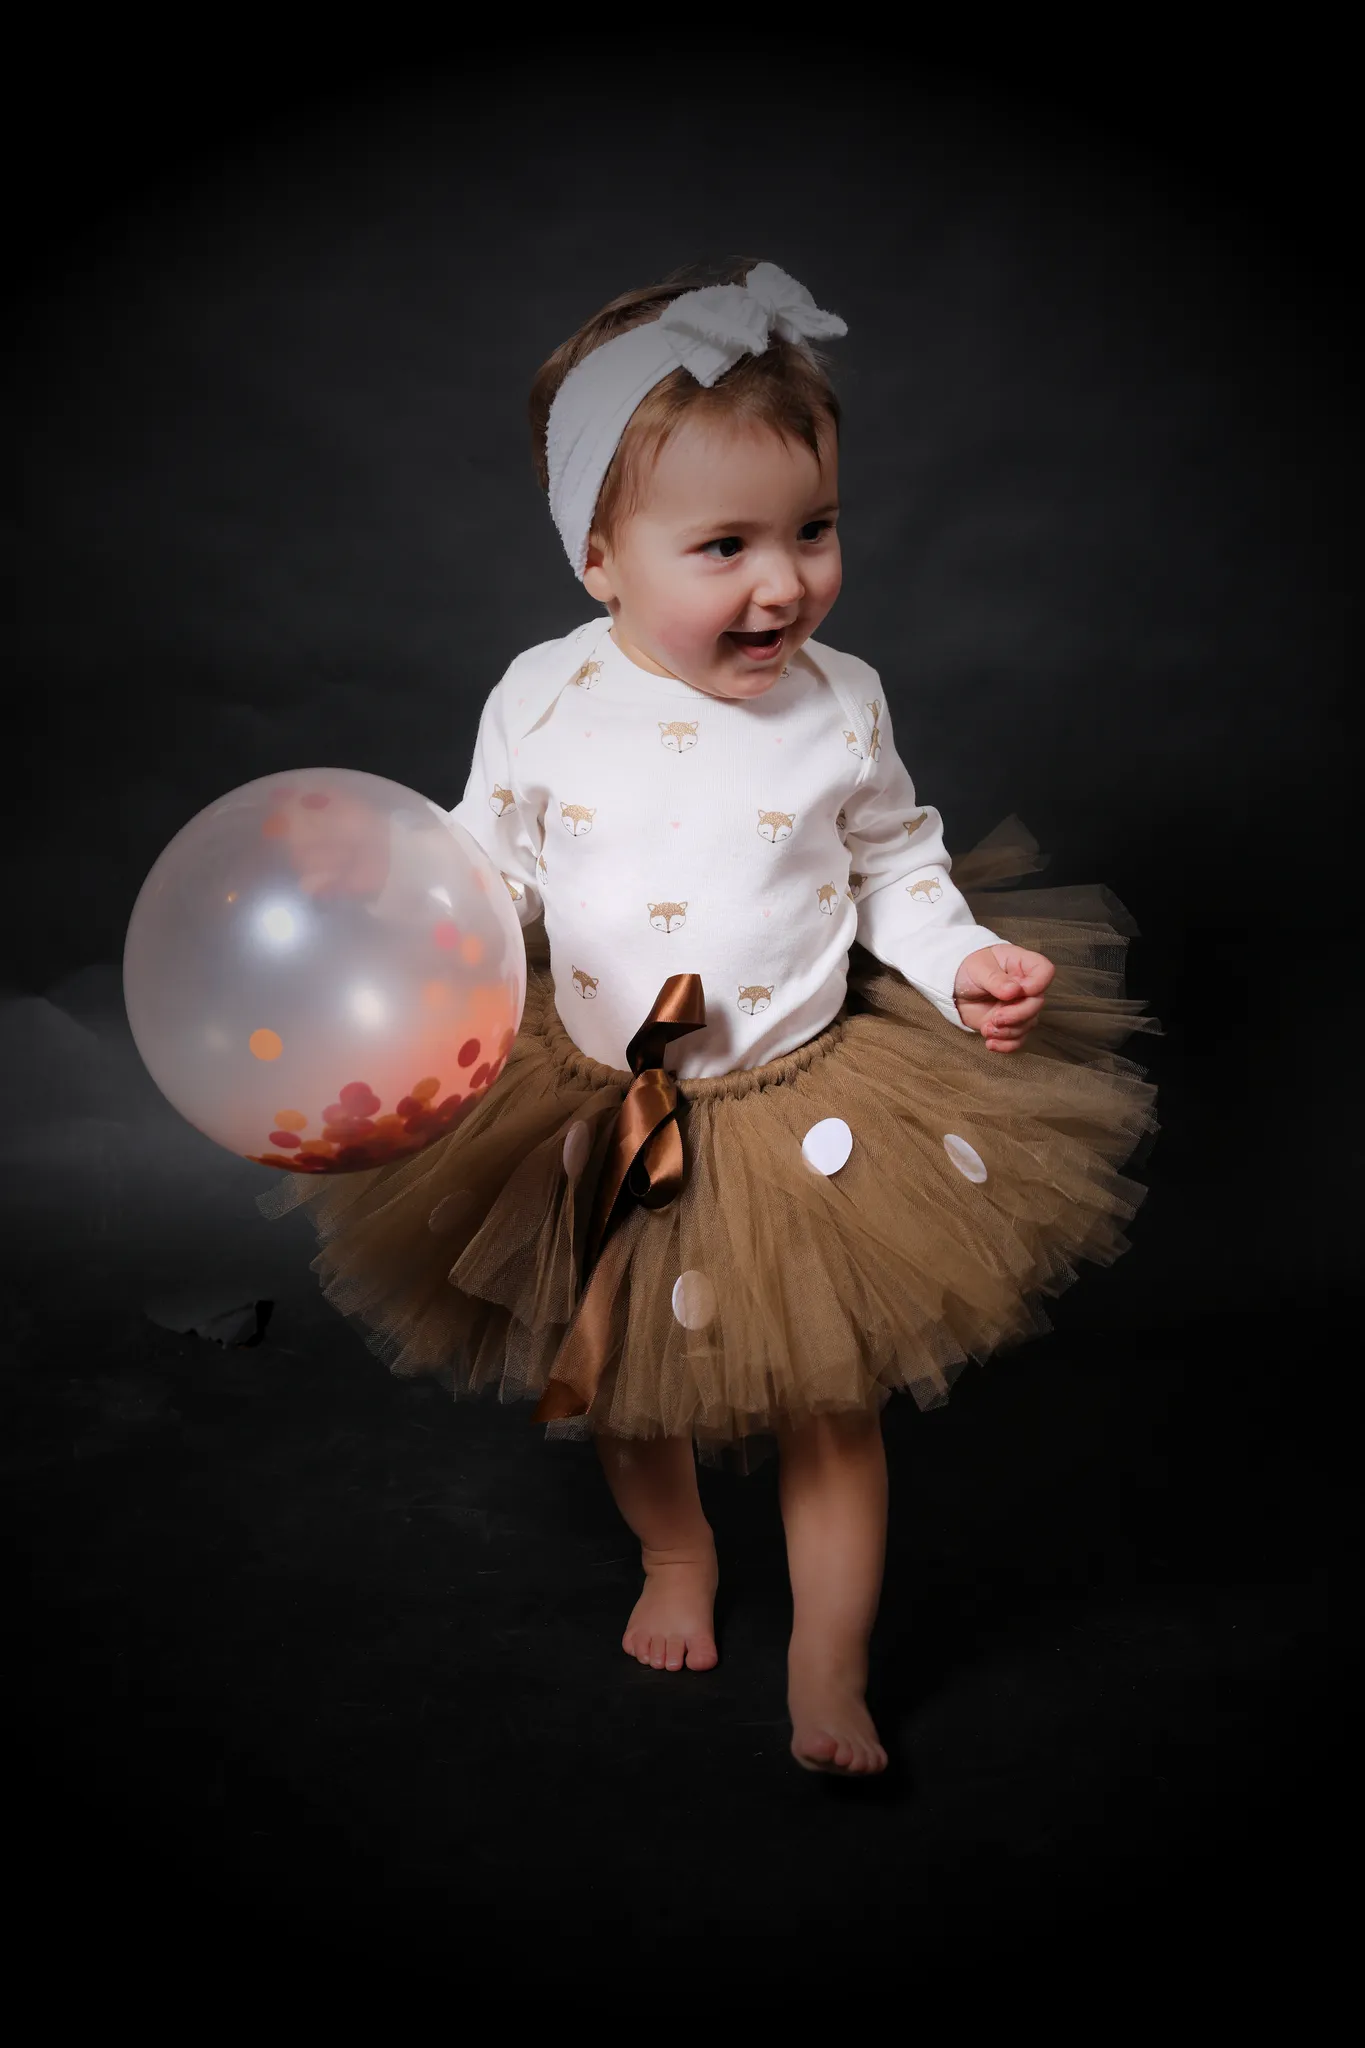 Human Body, Flash Photography, Baby & Toddler Clothing, Sleeve, Dress, Gesture, Happy, Sourire, Balloon, Baballe, Chapi Chapo, Bambin, Baby, Event, Darkness, Formal Wear, Day Dress, Fun, Party Supply, Foot, Personne